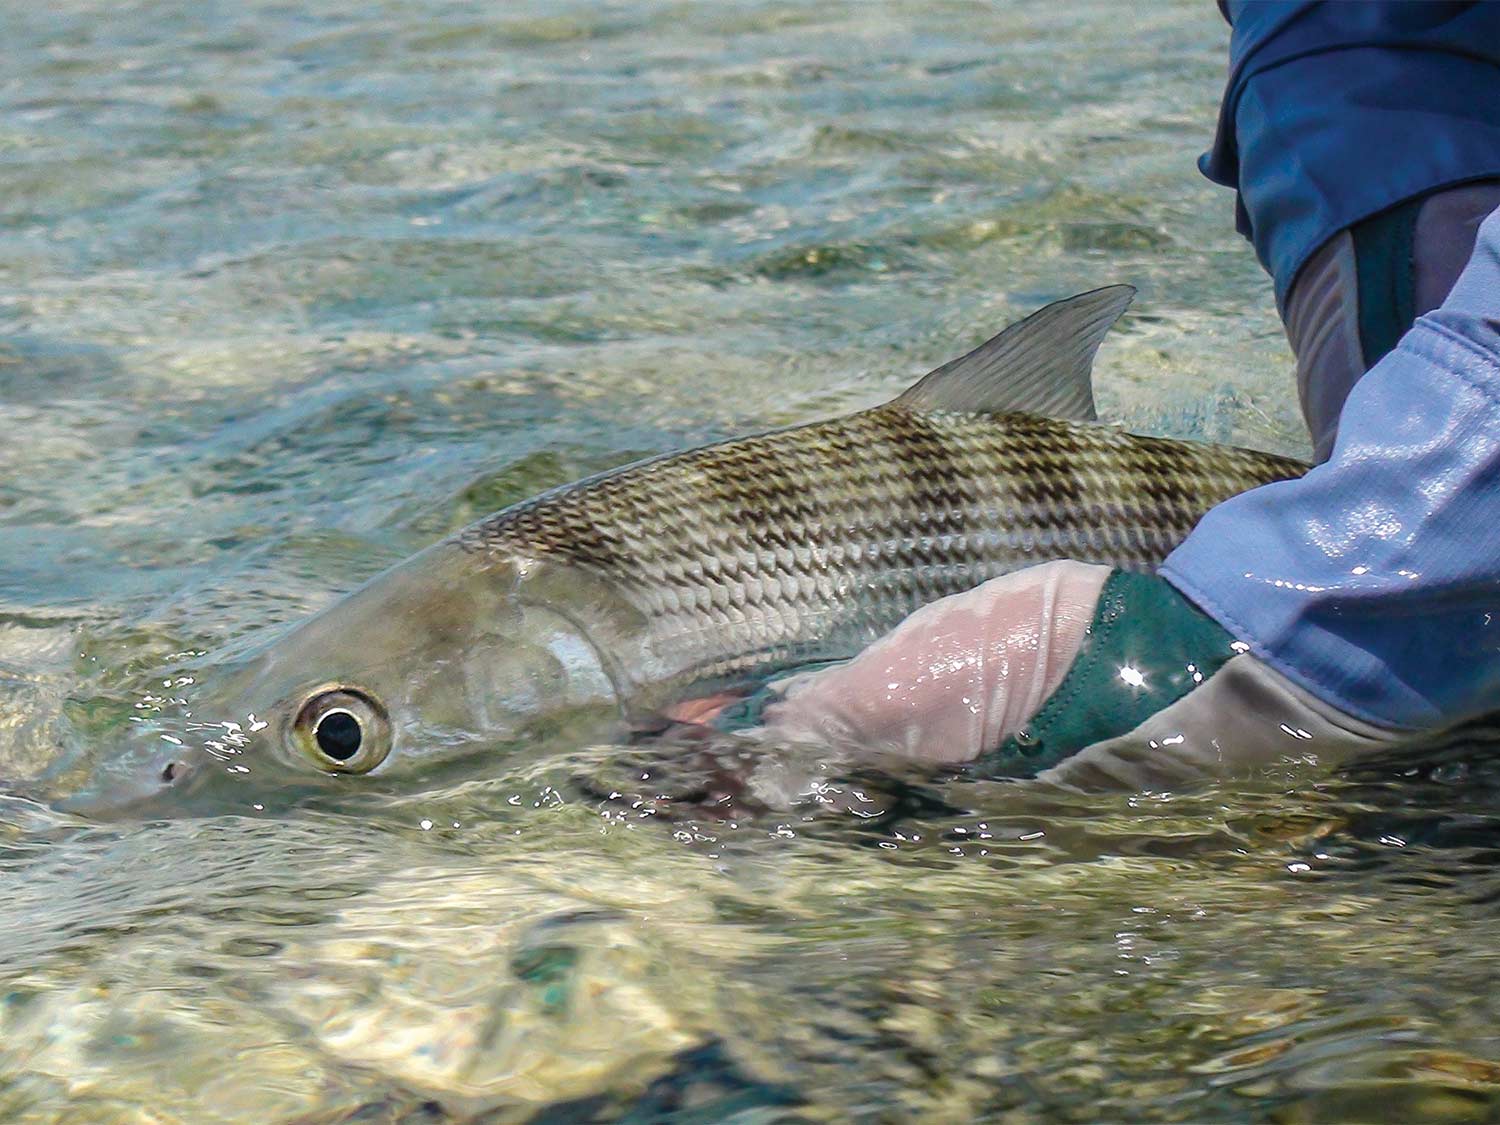 releasing a large bonefish in the Turneffe Flats